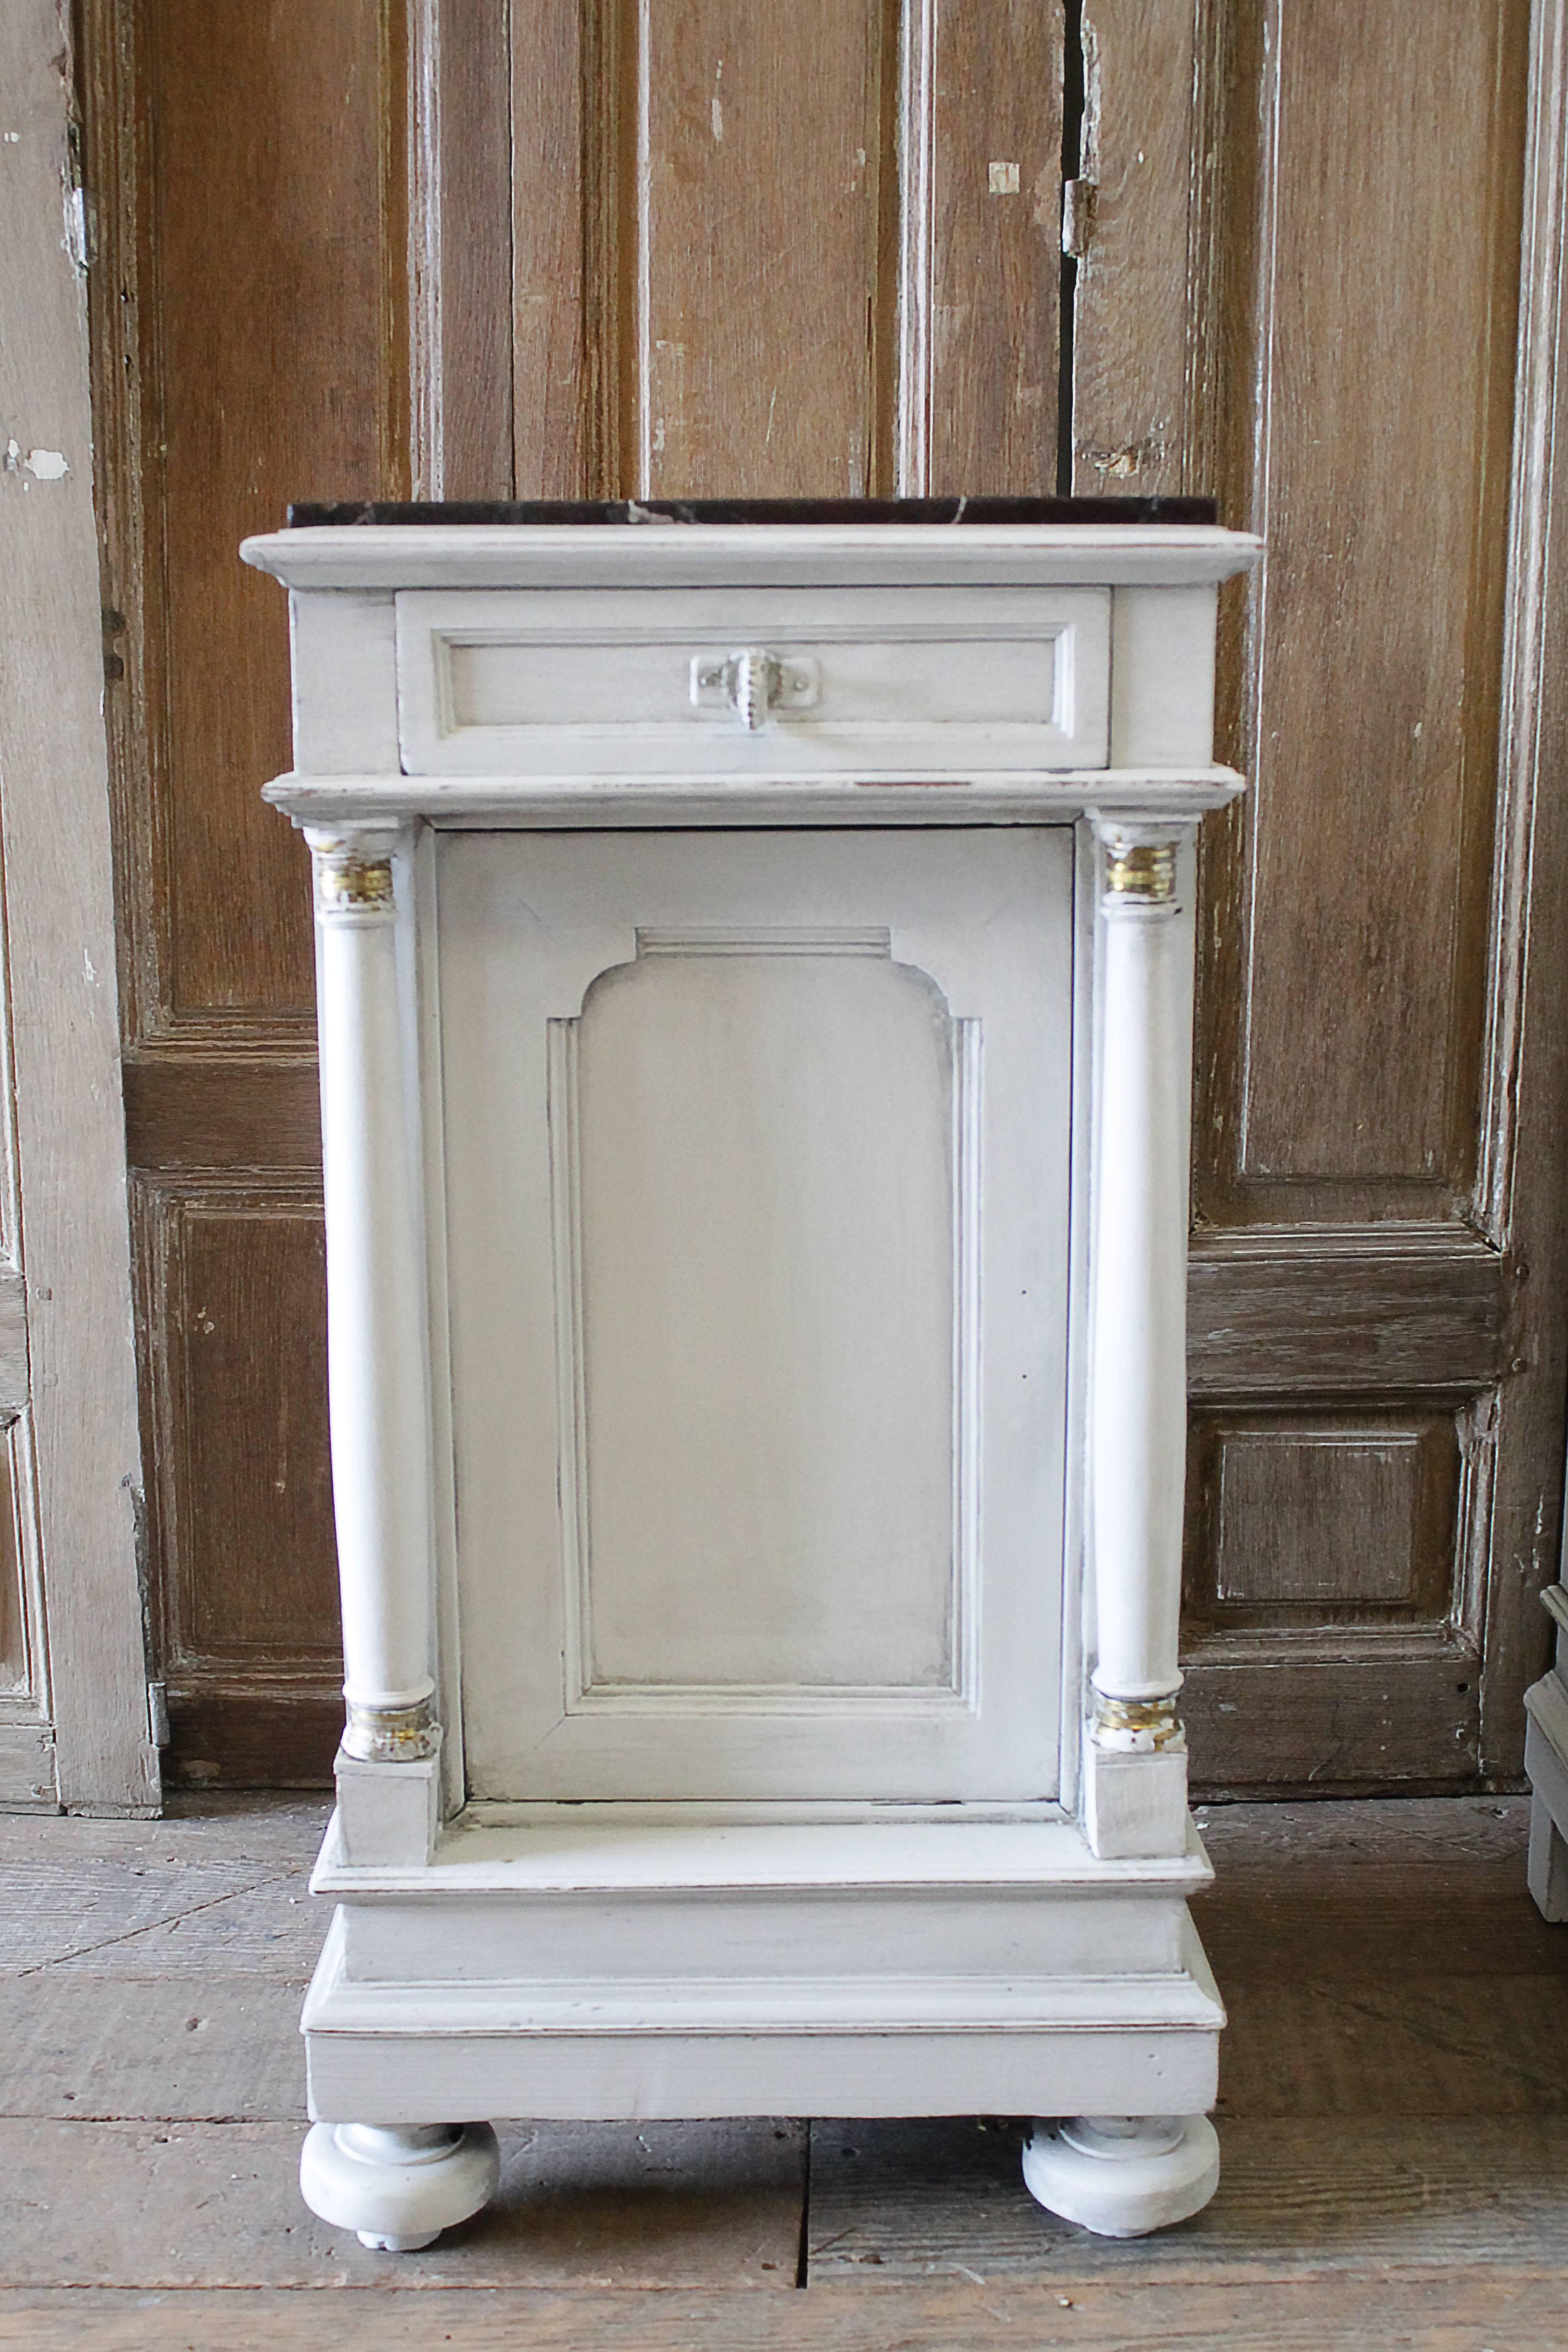 Petite bedside tables have been painted in a soft pale oyster grey, with subtle areas of distress, exposing beautiful brass details around the top and bottoms of the columns. The drawers have a brass pull, the bottom doors do open up, however they